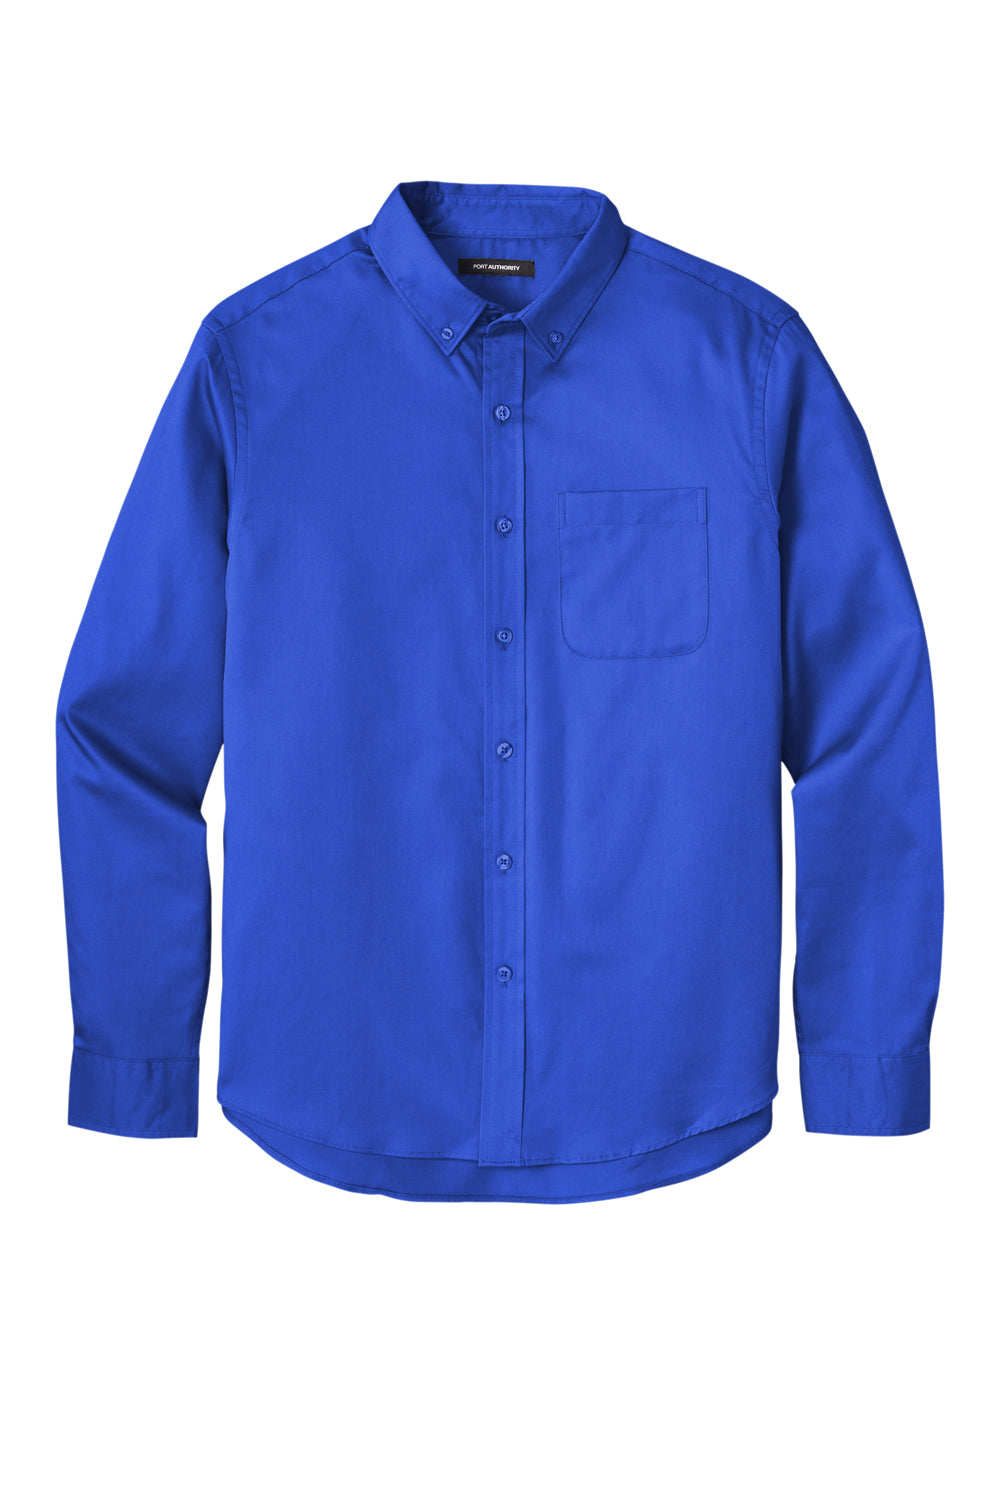 Port Authority W808 SuperPro Wrinkle Resistant React Long Sleeve Button Down Shirt w/ Pocket True Royal Blue Flat Front